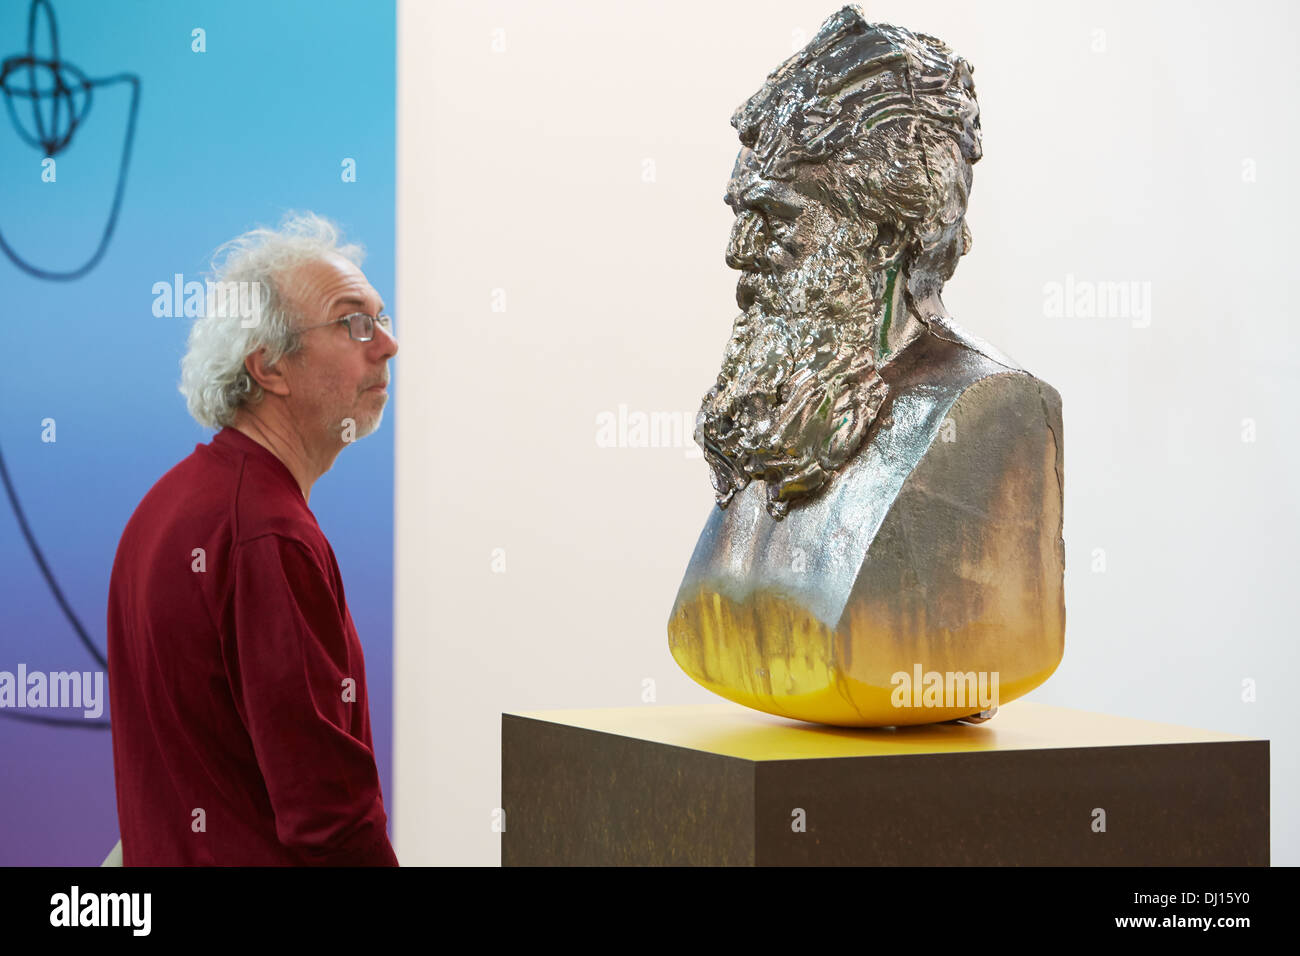 Man looking at contemporary sculpture during Artissima 2013 art fair in Turin, Italy Stock Photo